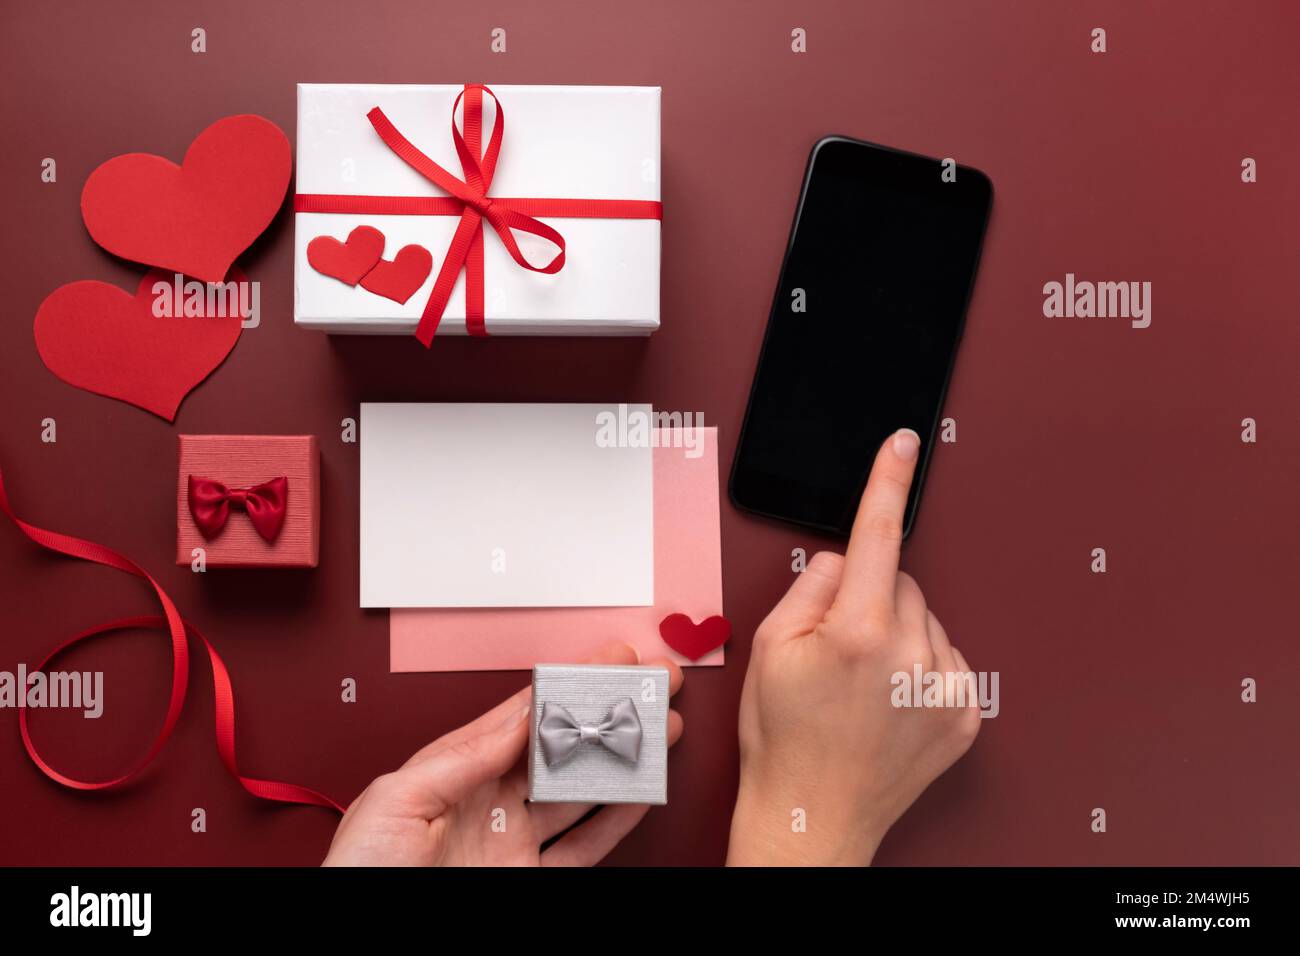 https://c8.alamy.com/comp/2M4WJH5/st-valentines-day-online-shopping-gifts-in-boxes-search-in-smartphone-for-gifts-copy-space-for-love-message-white-card-with-envelope-mock-up-2M4WJH5.jpg